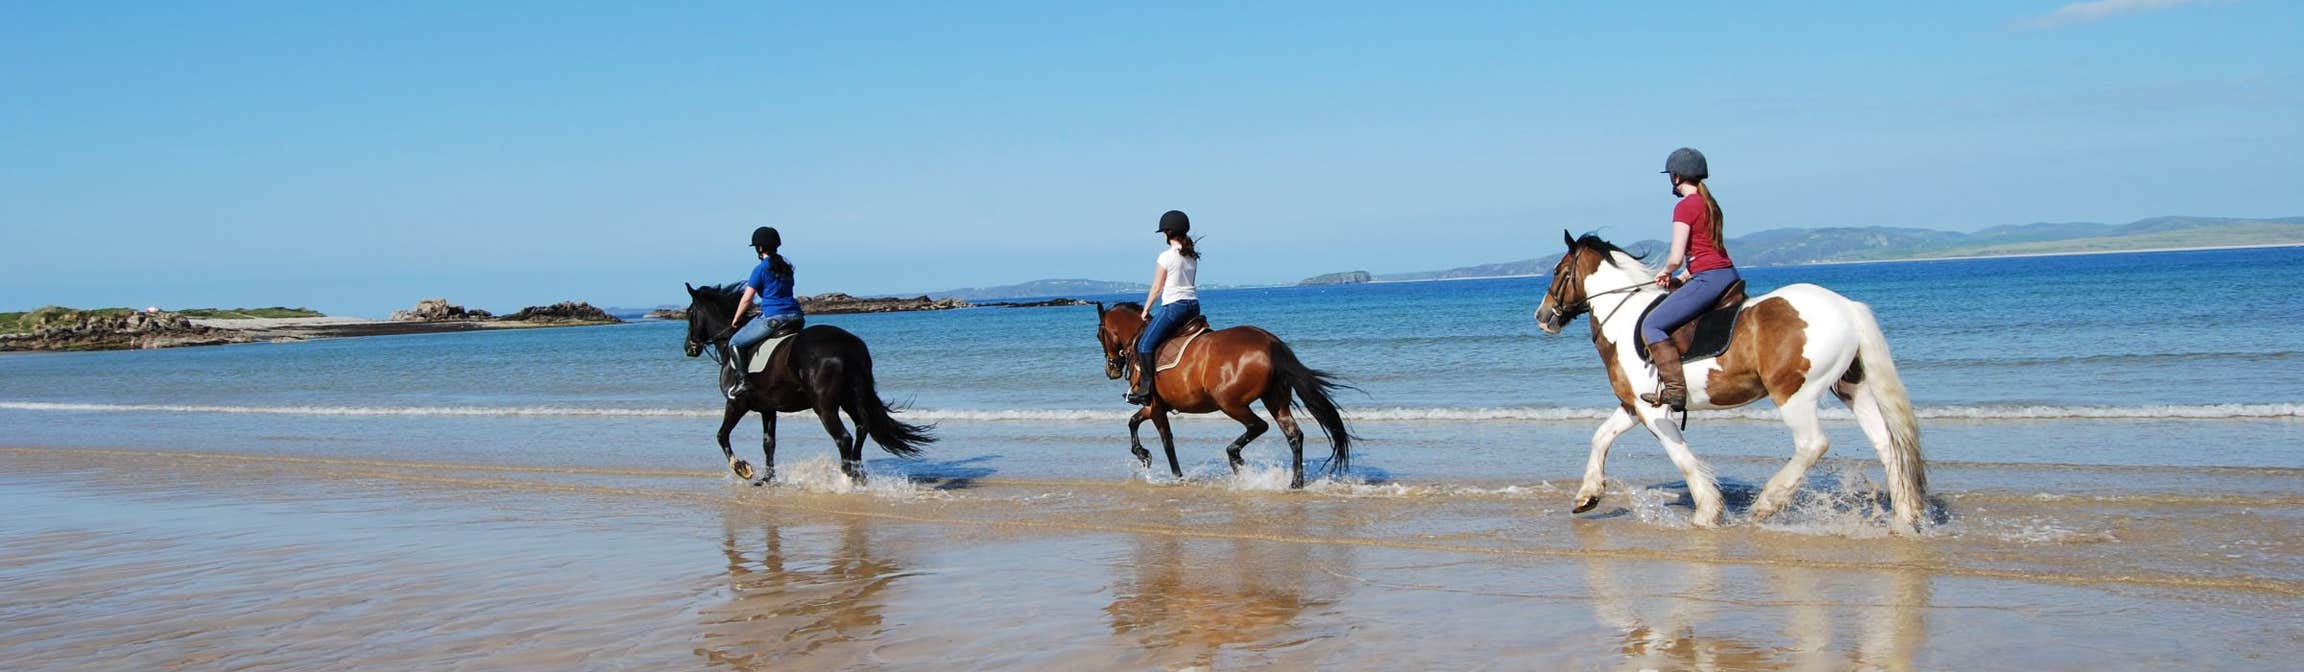 Image of people riding horses on a beach in Clonmany in County Donegal